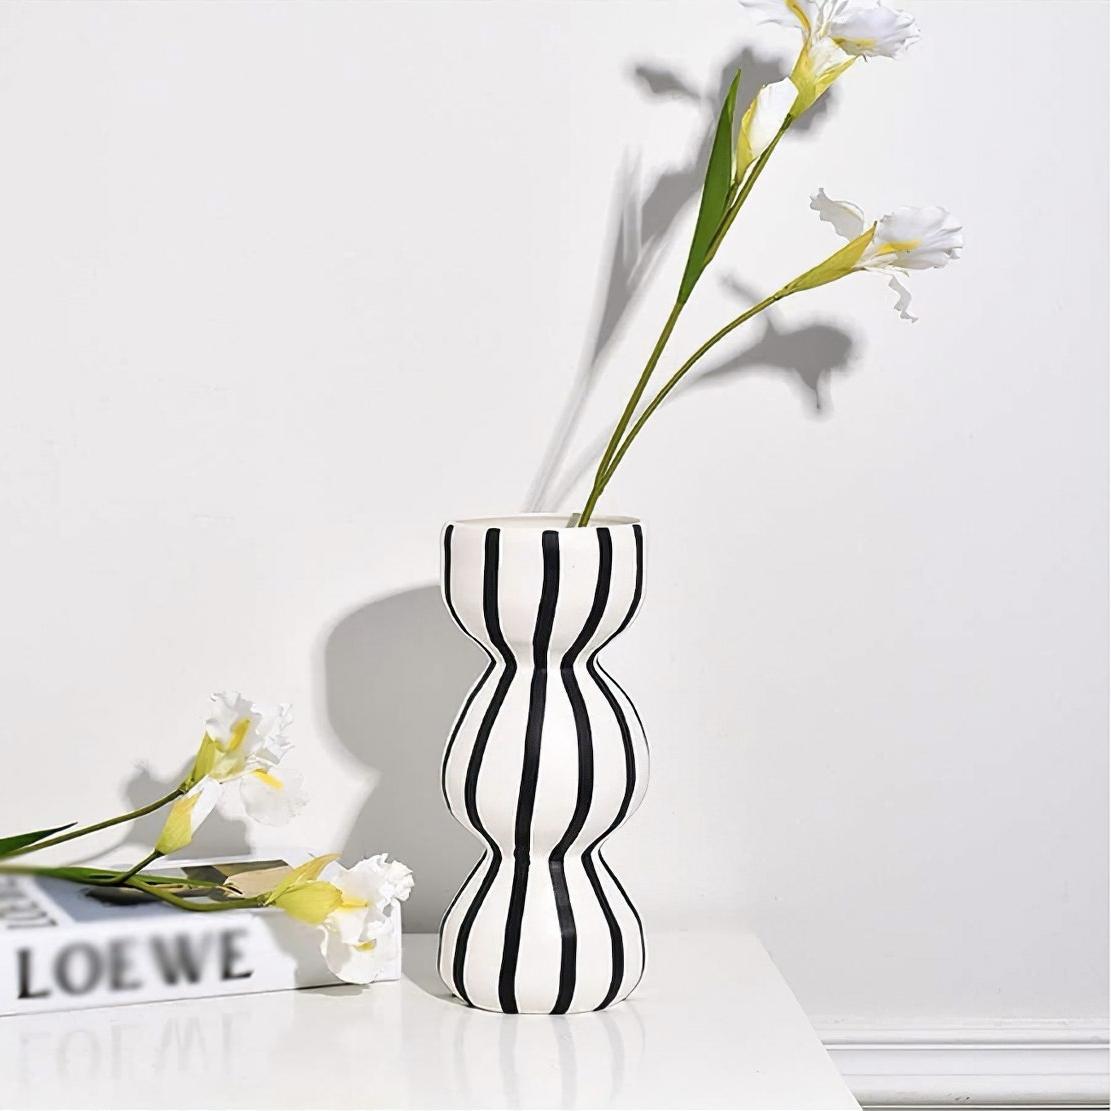 White bubble candy vase with black stipes